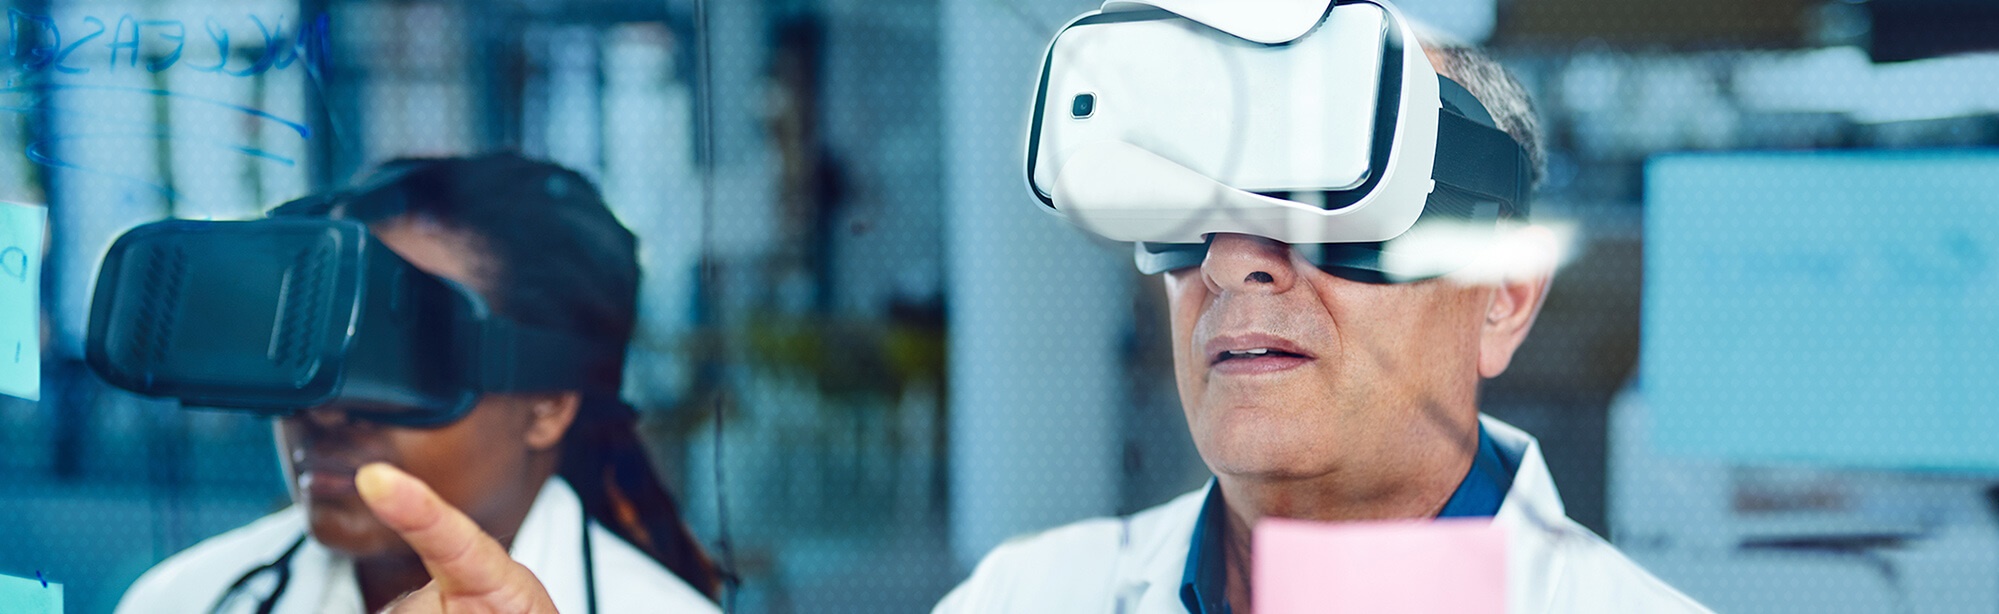 healthcare professionals using virtual reality headset; Virtual Reality in Higher Education